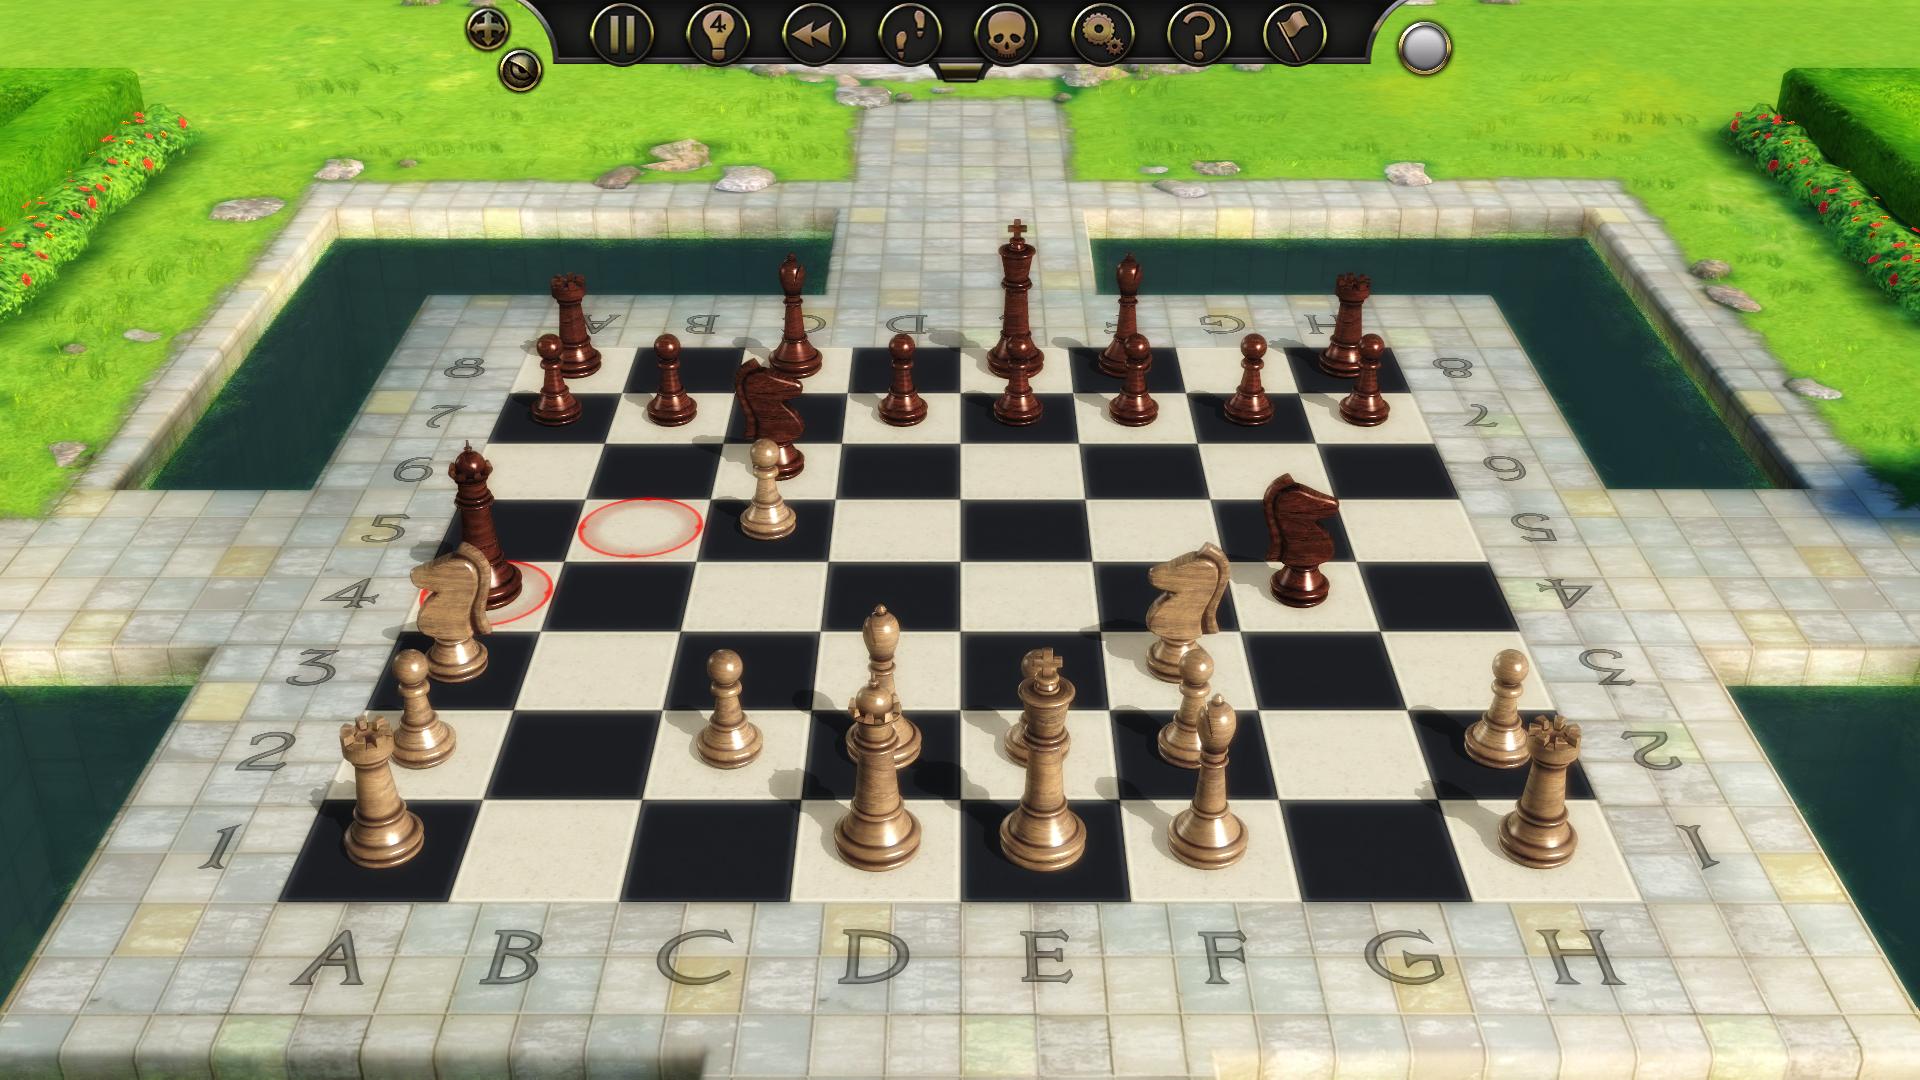 Battle Chess for Windows game download